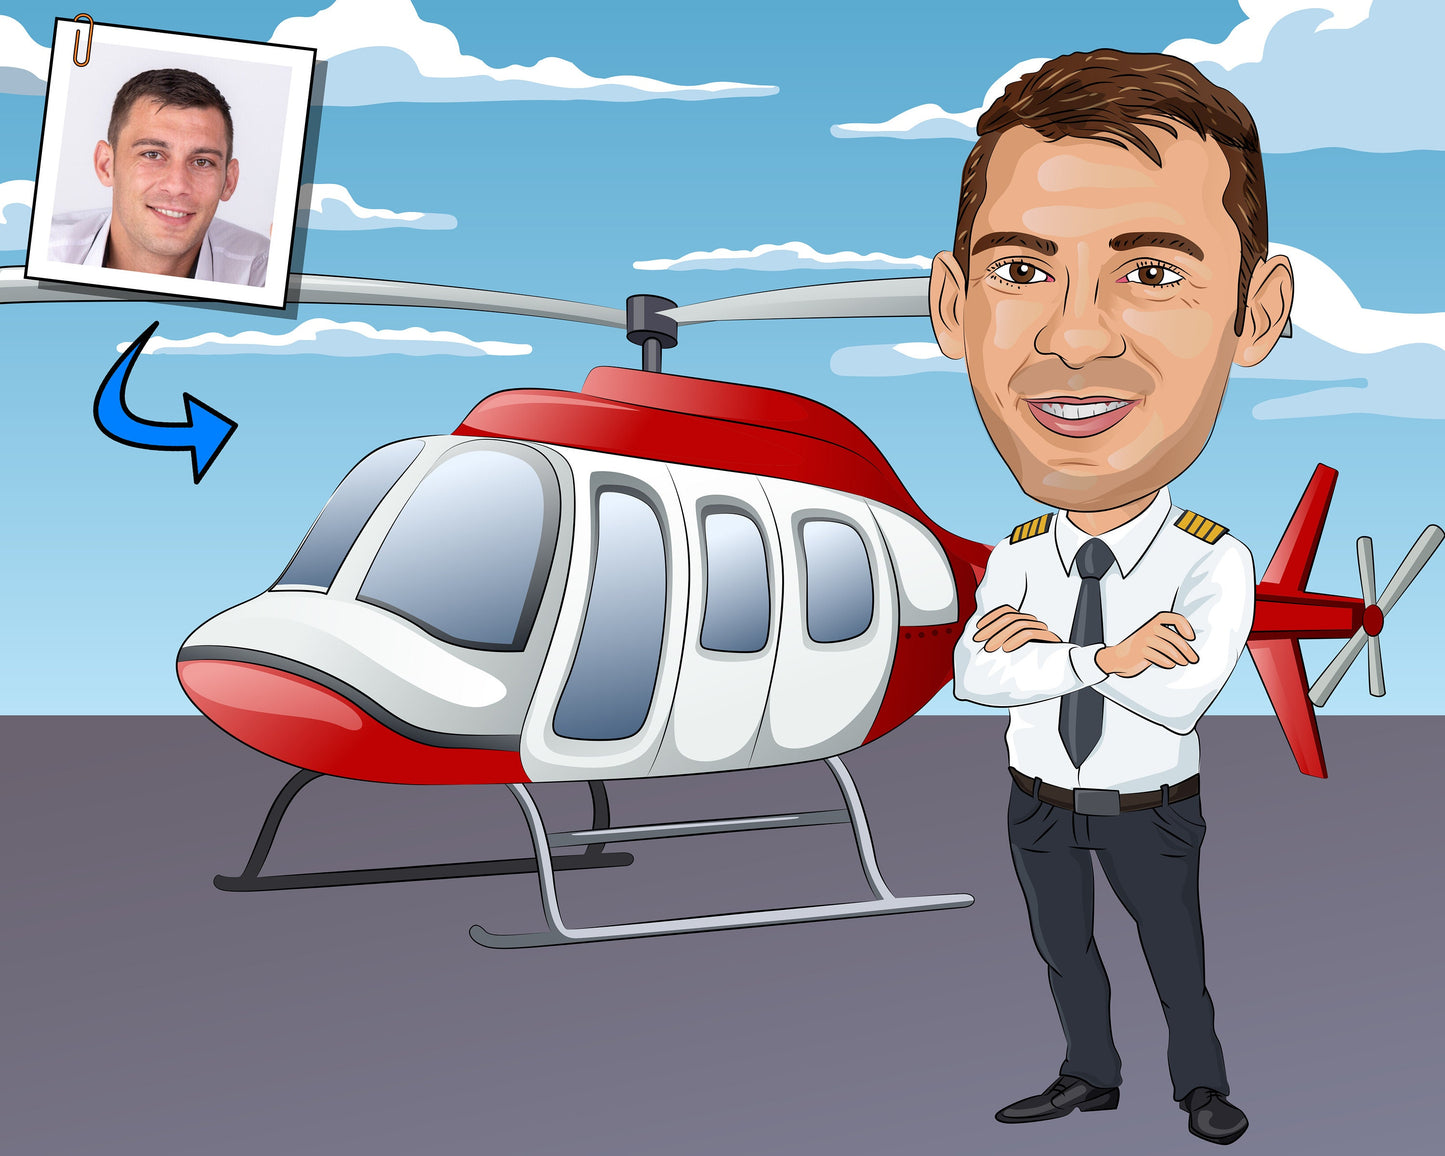 Helicopter Pilot Gift - Custom Caricature Portrait From Your Photo